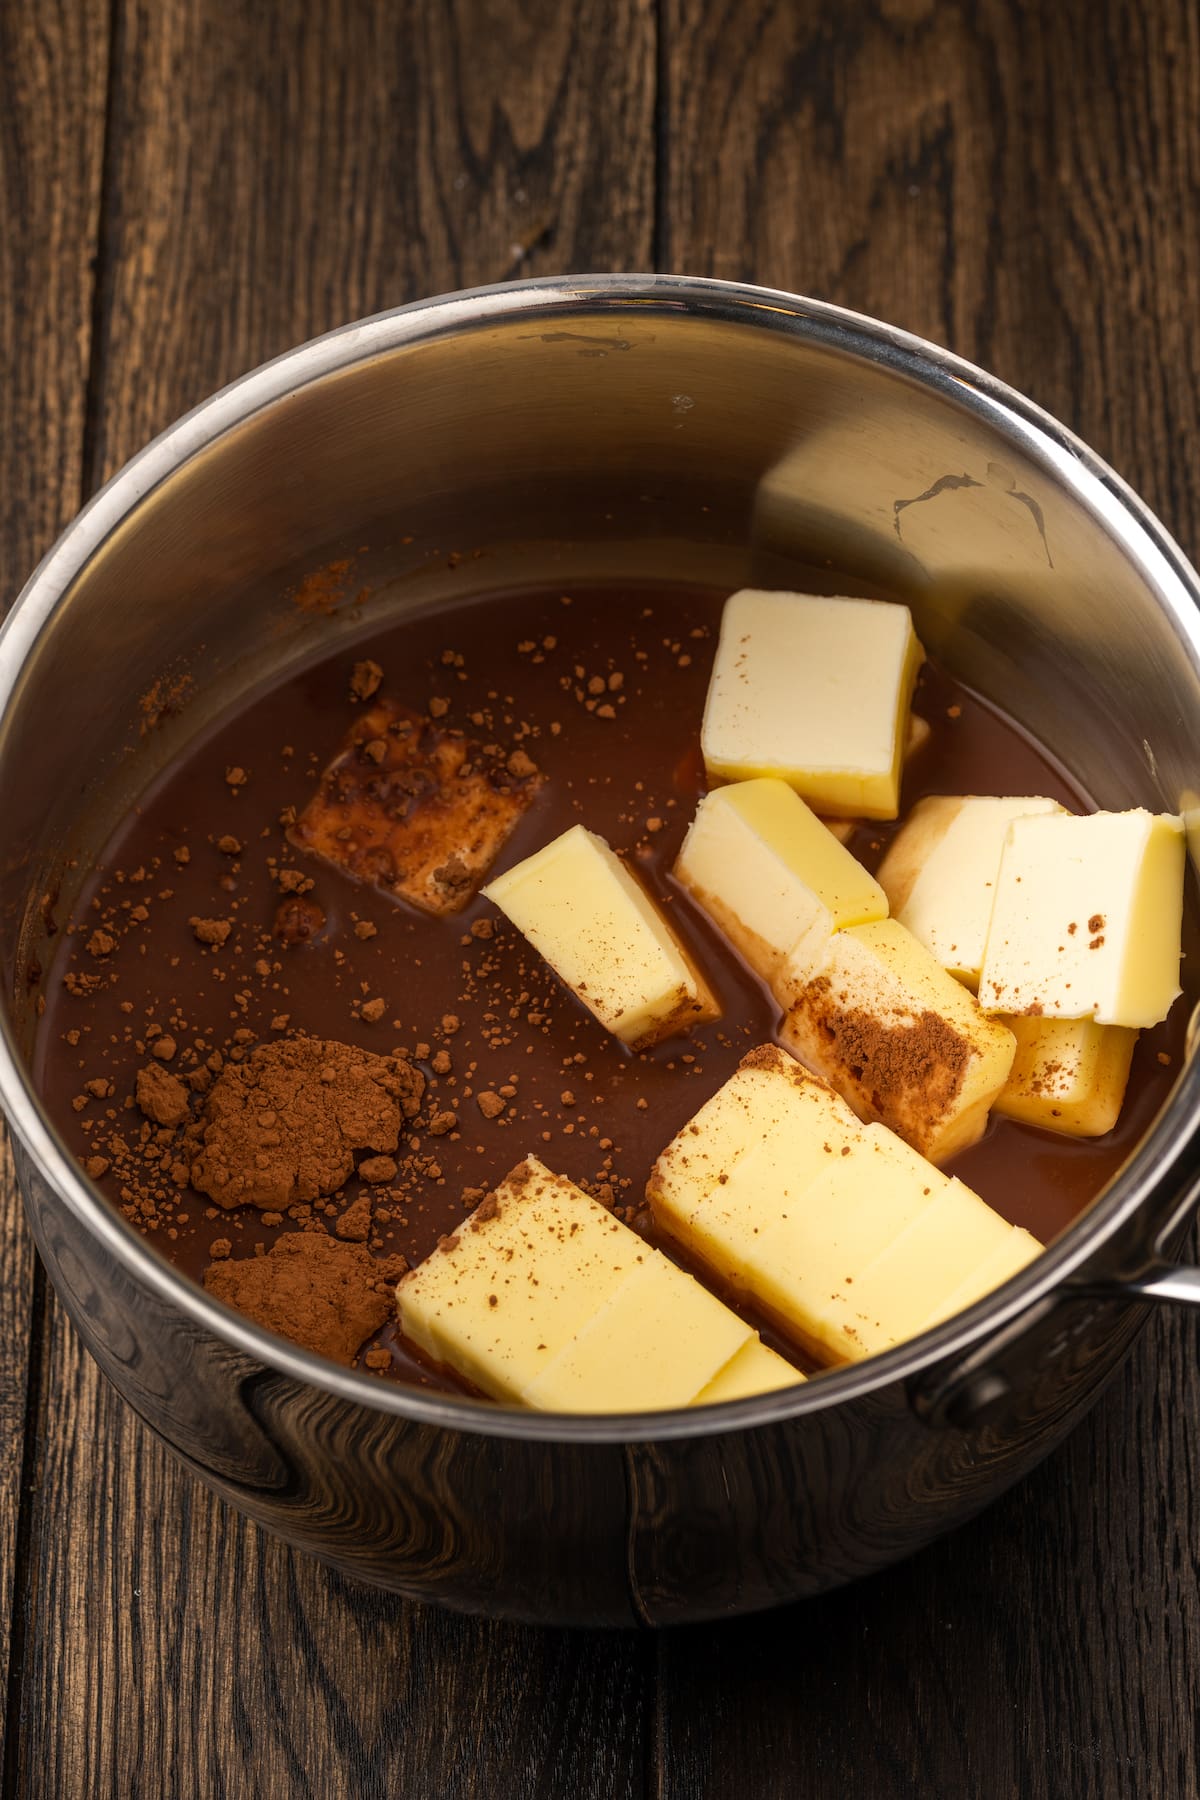 Cubes of butter and cocoa powder combined in a saucepan.